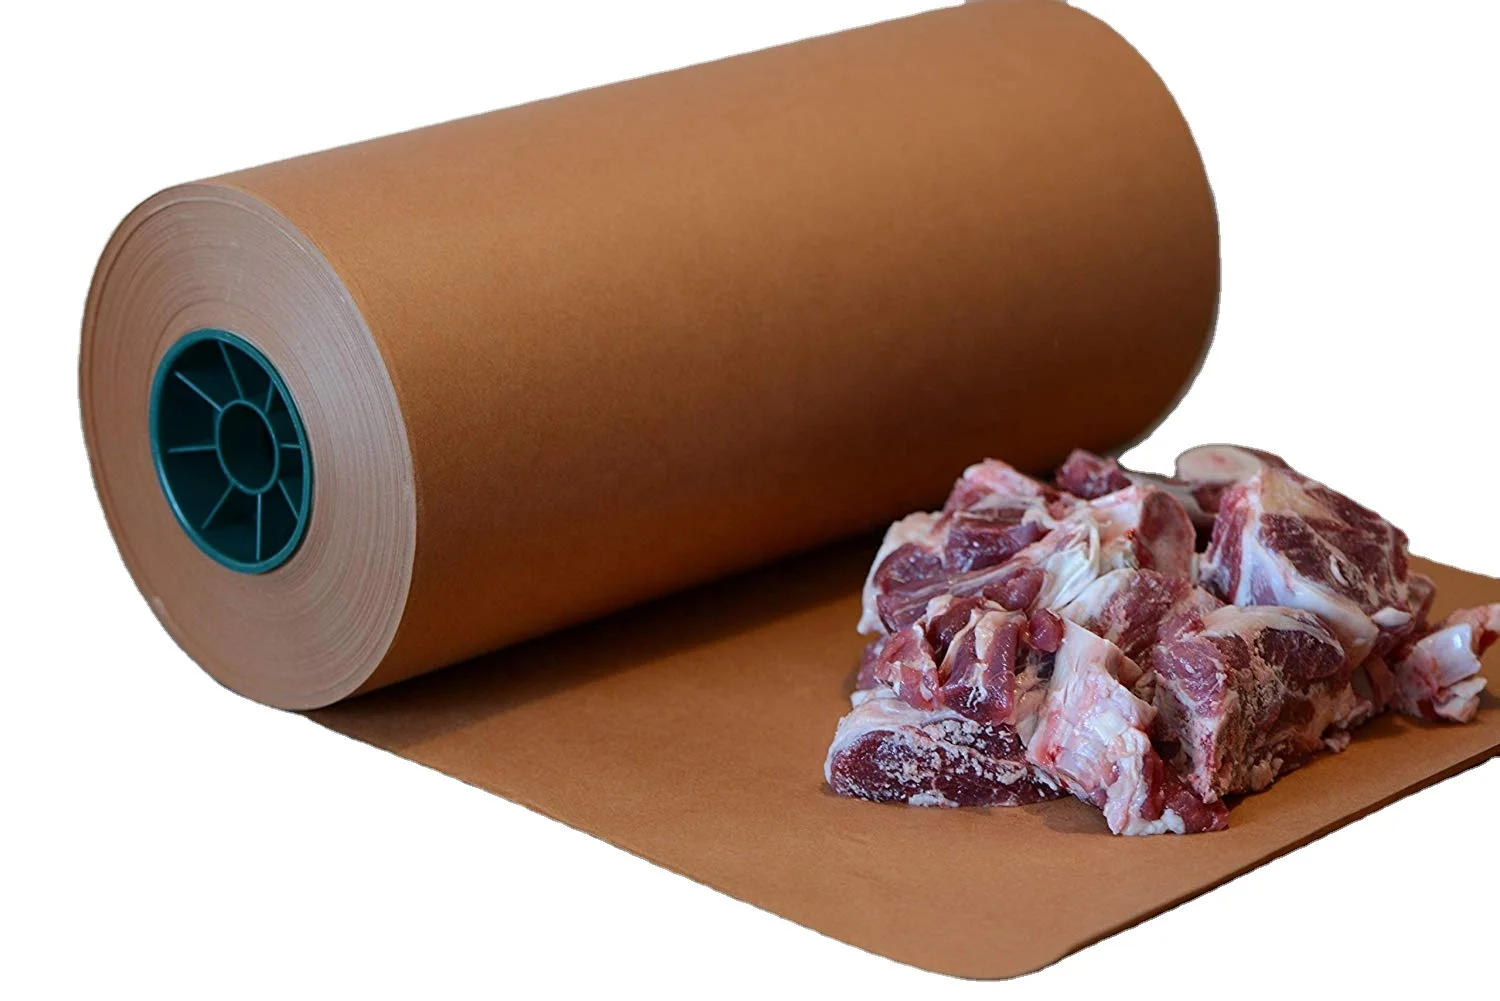 Details about   Pink Butcher BBQ Paper Dispenser Box-Food Grade Peach Wrapping Paper for Smoking 